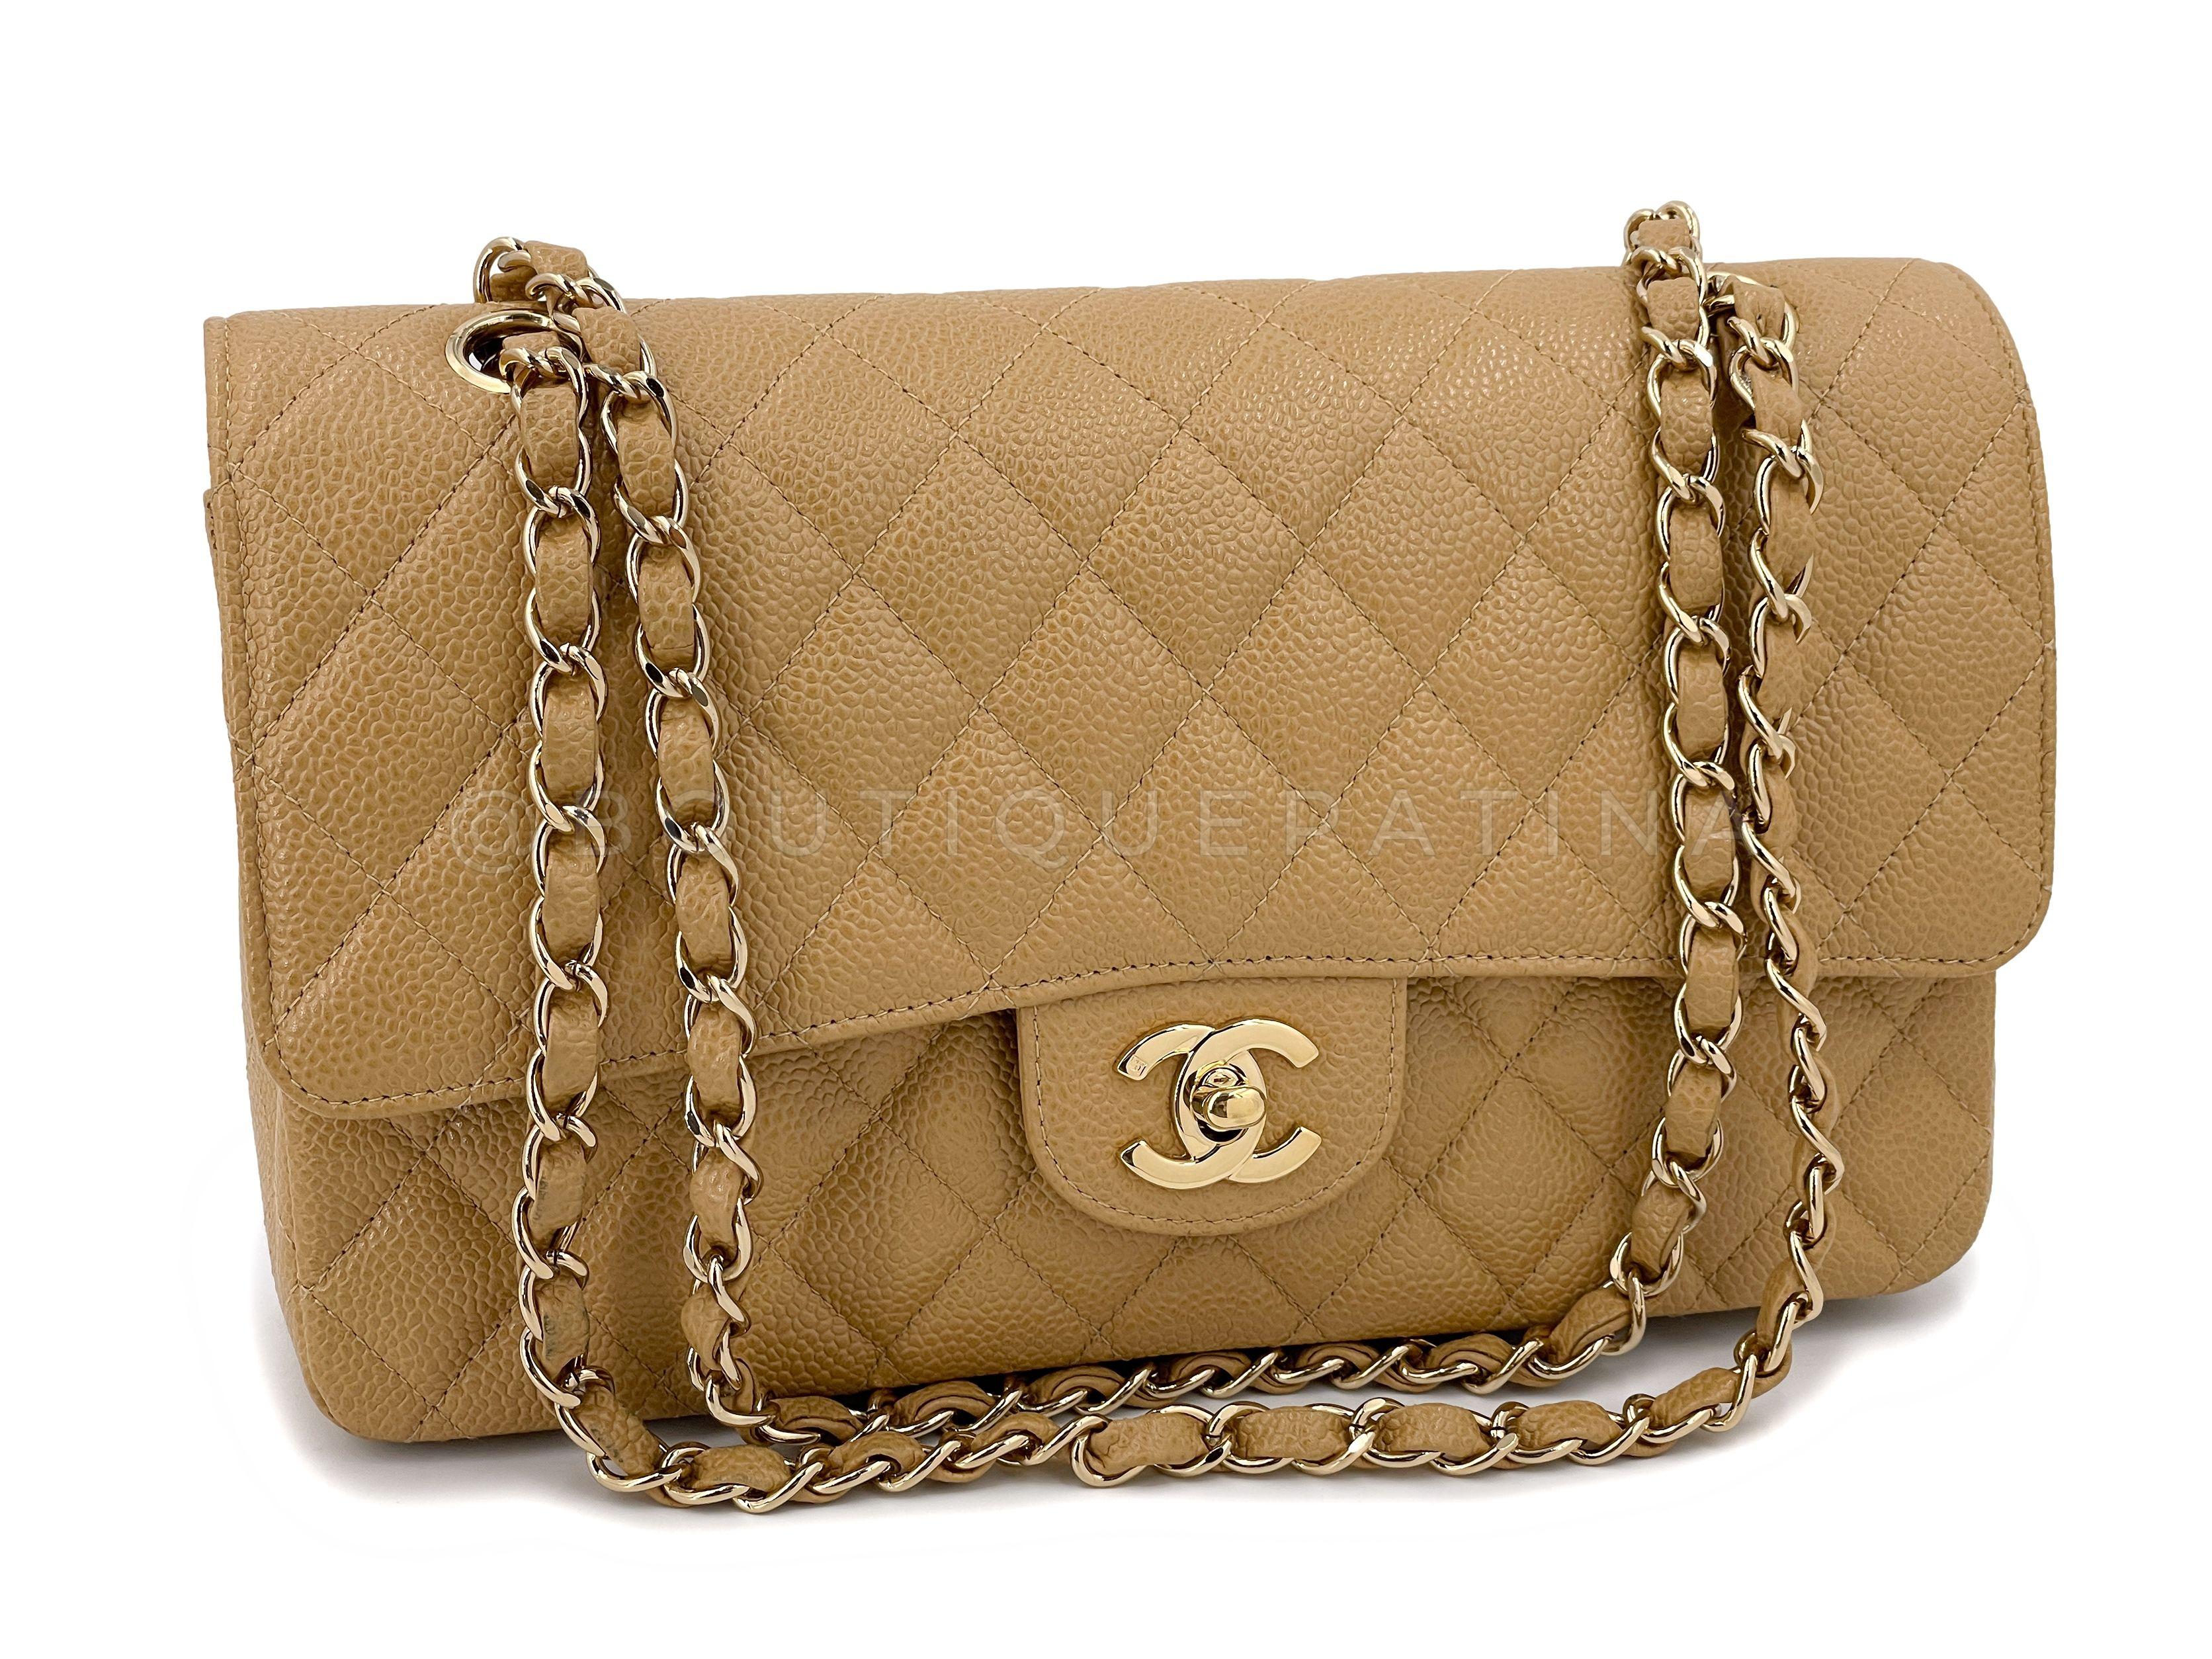 Store item: 64907
Boutique Patina specializes in sourcing and curating the best condition preowned vintage Chanel leather treasures by searching closets around the world. 

This is a vintage classic. A 7 million series serial number from the 2002